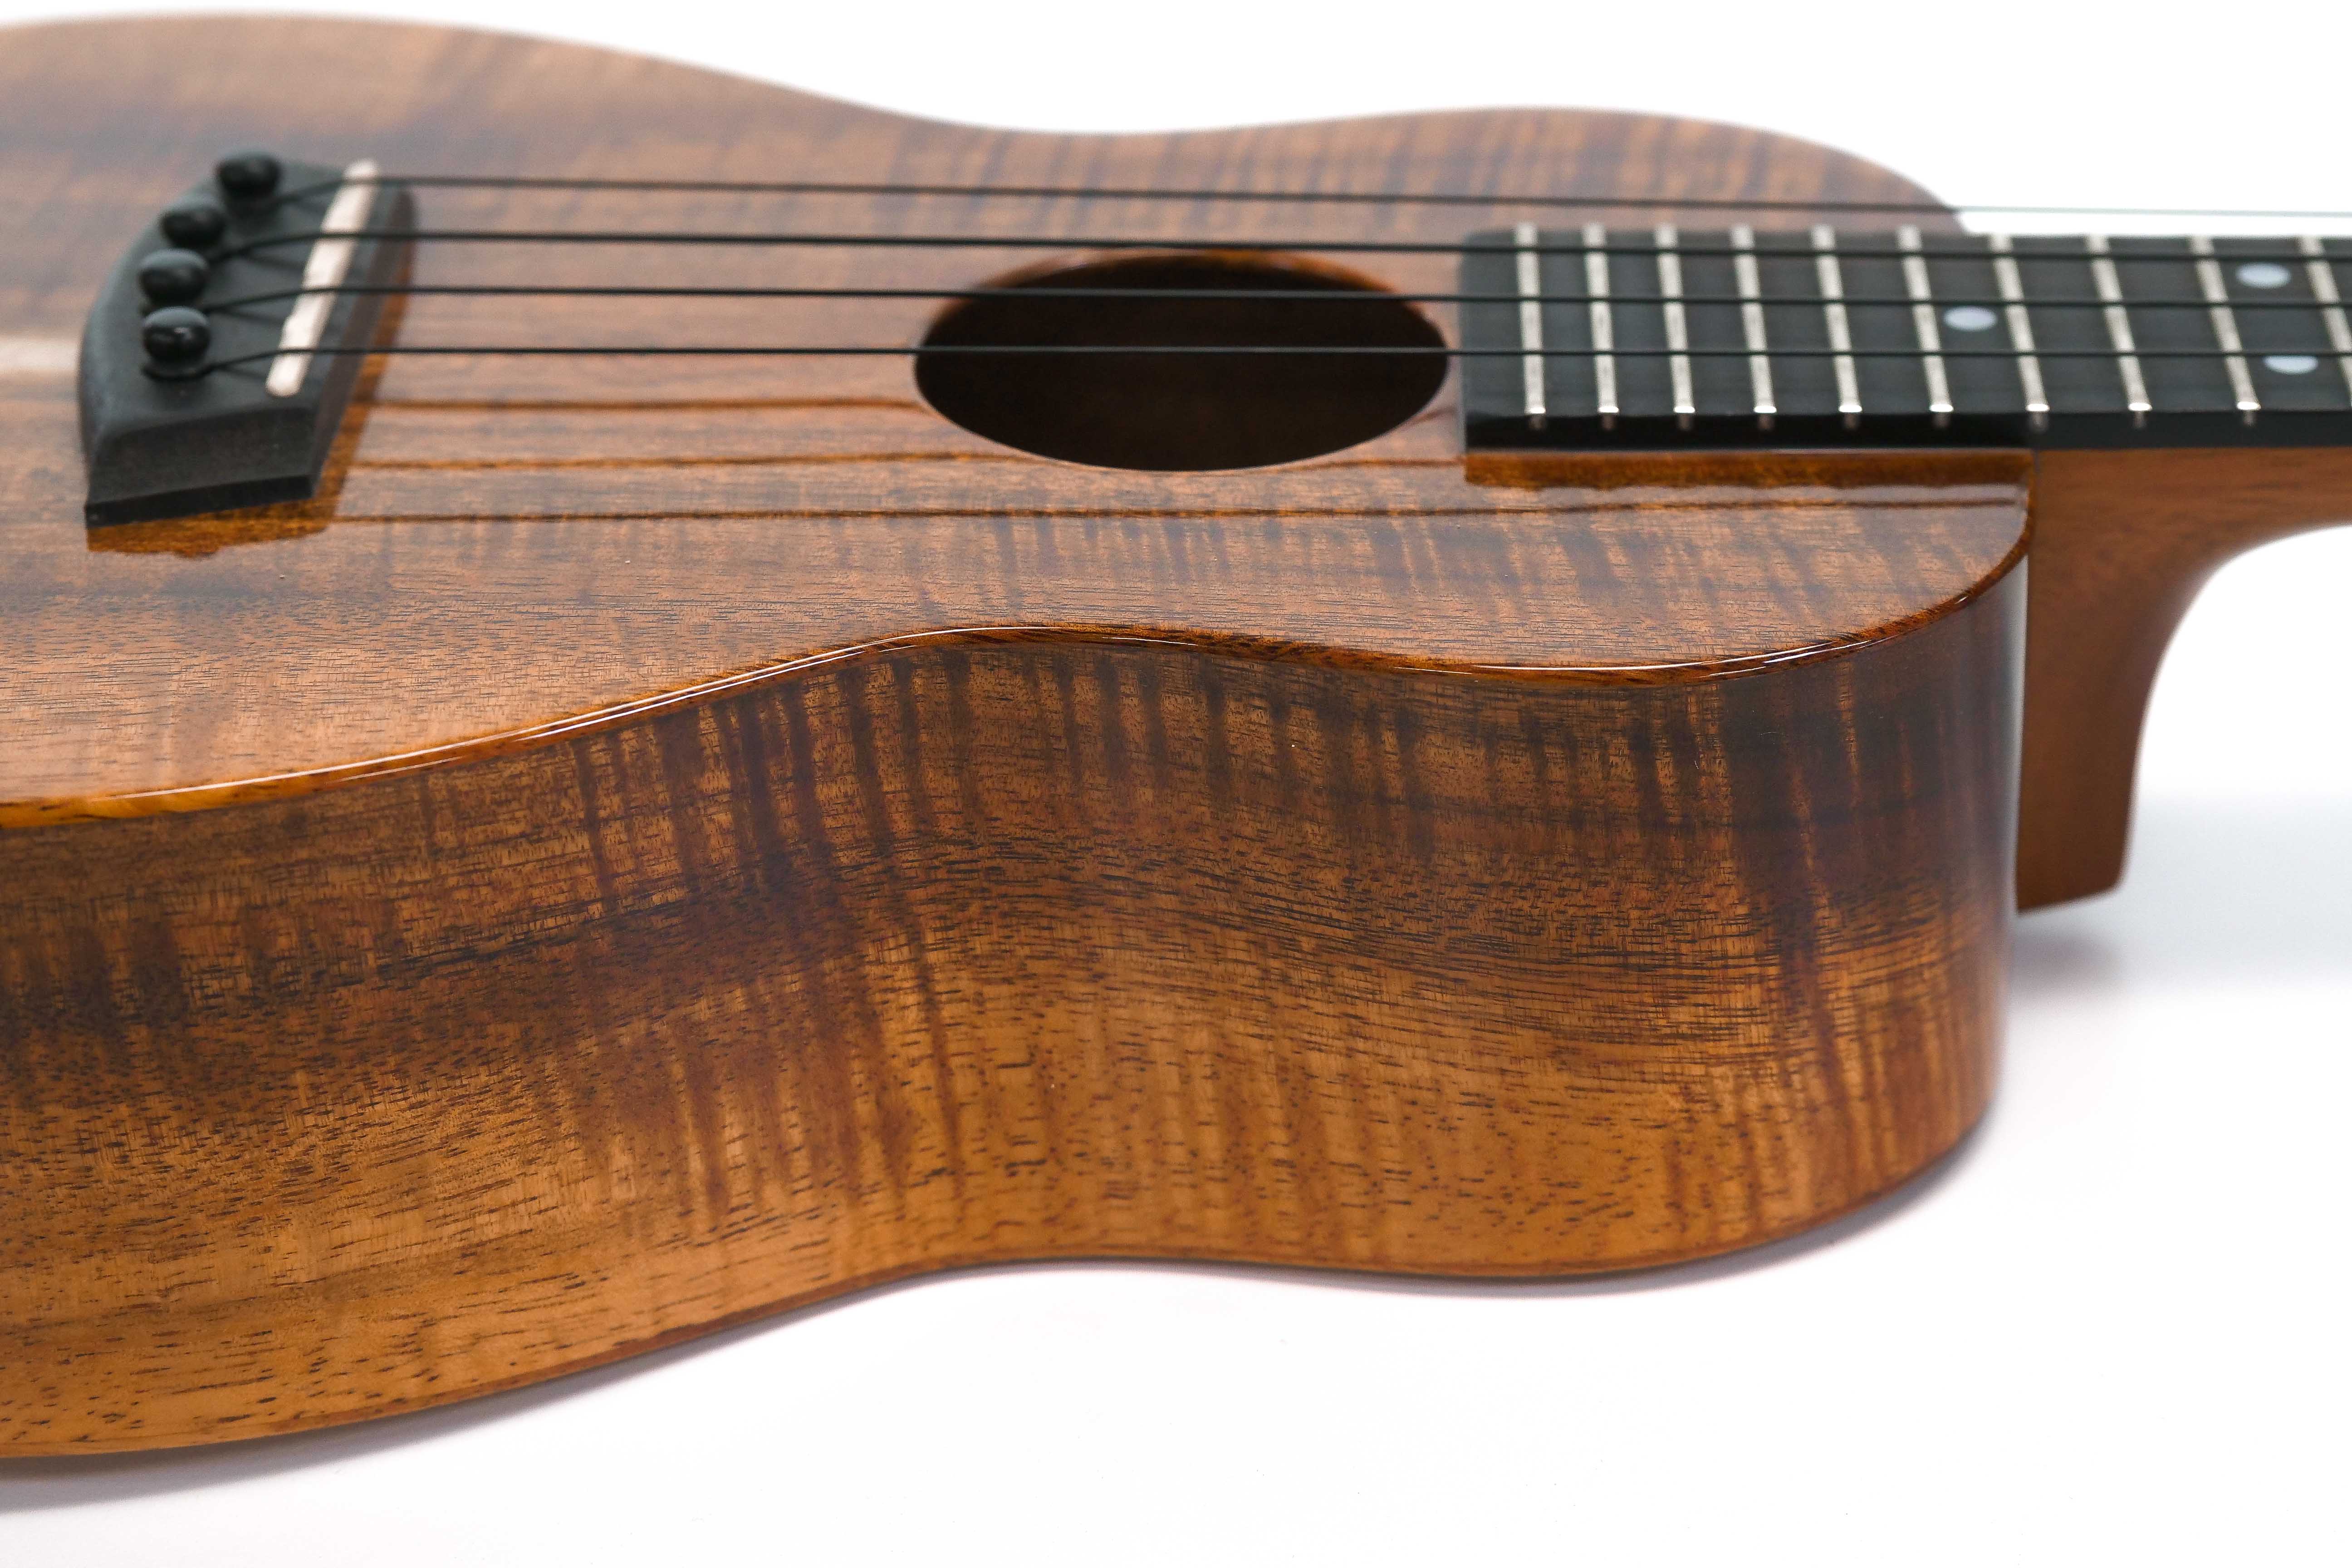 [PRE-OWNED] Kanile'a K-1 C Deluxe Concert Ukulele Solid Koa "Lindi" Made In Hawaii